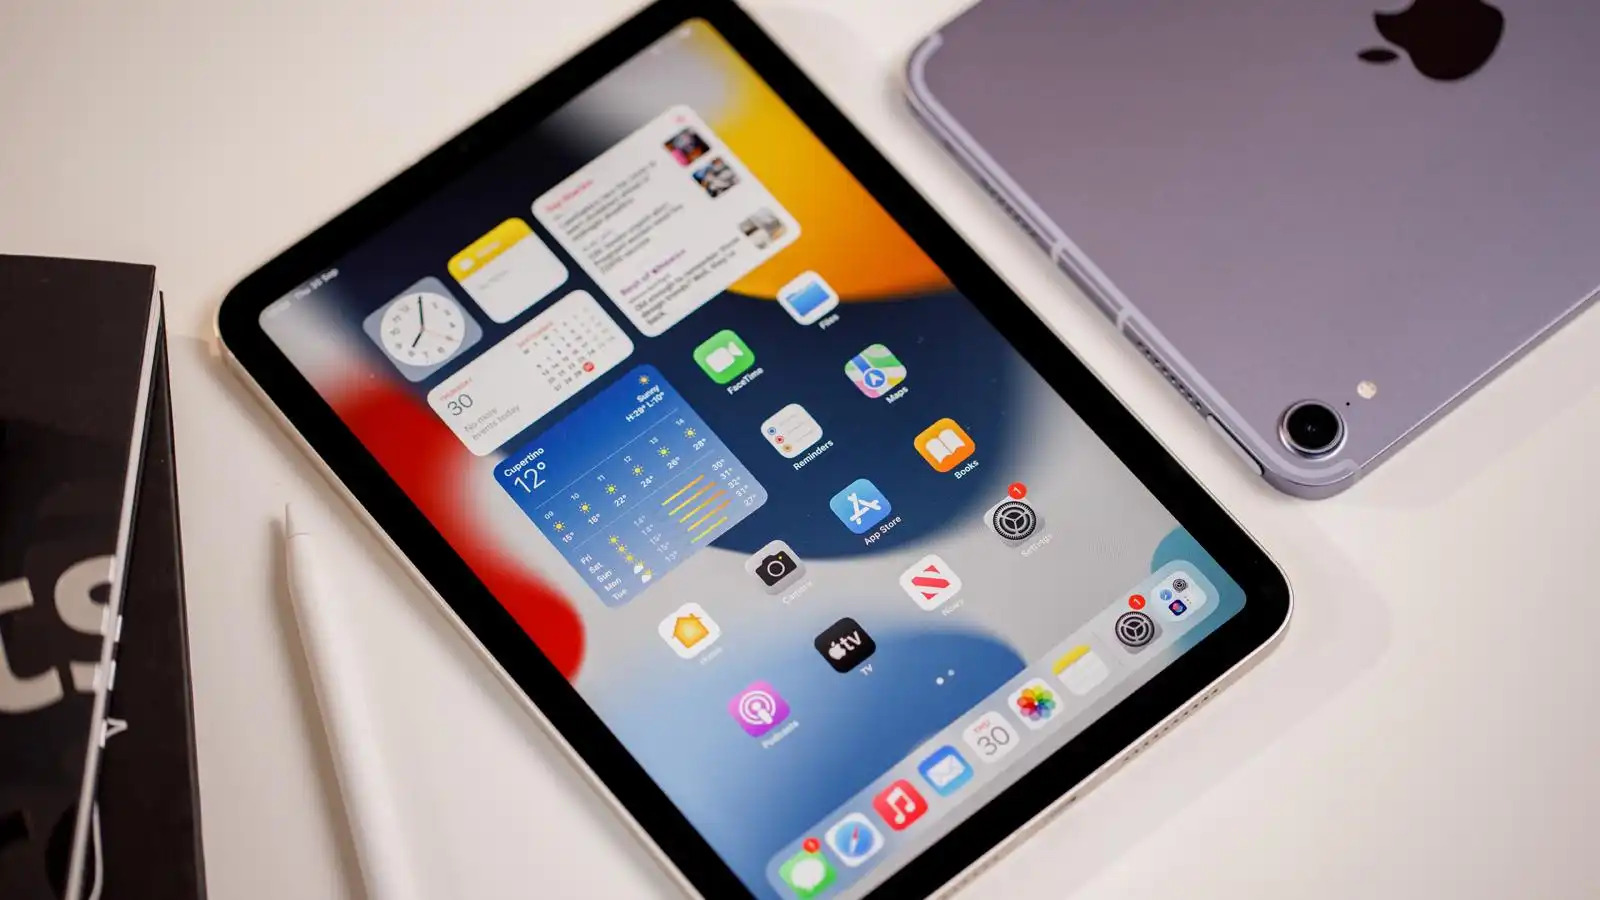 The Next IPad Mini Might Be More Powerful, But That’s Not What It Needs